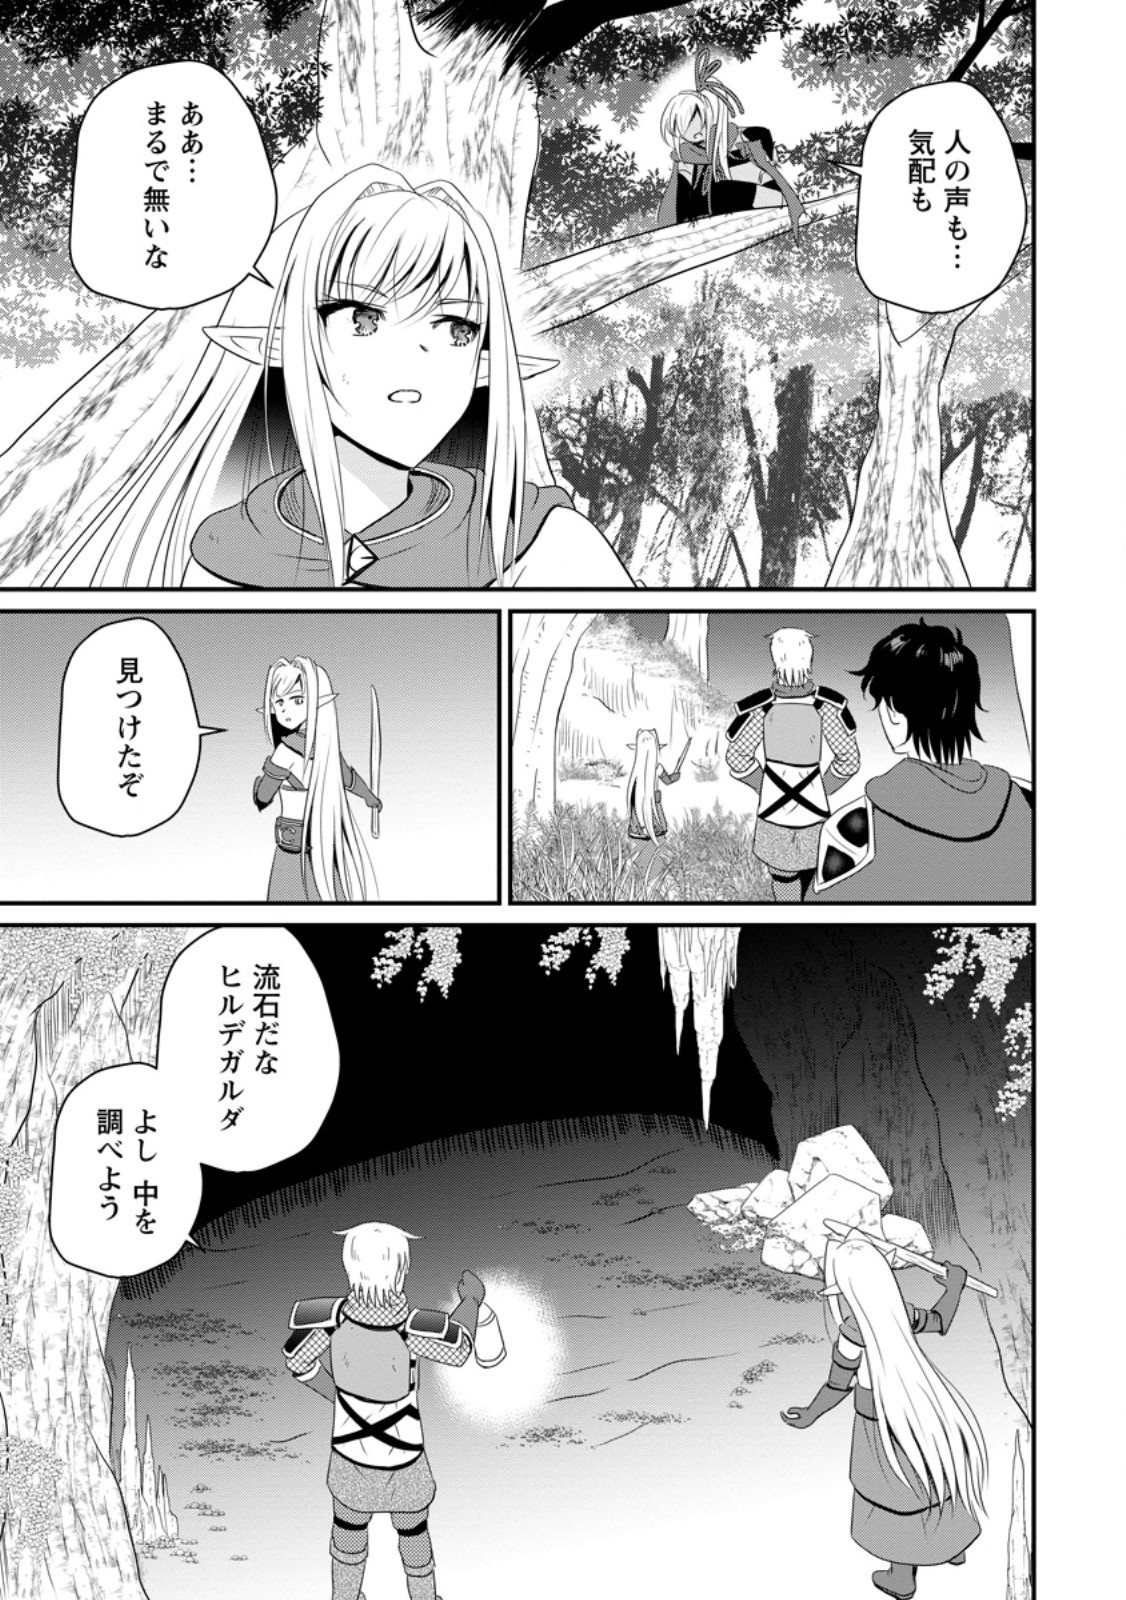 The Frontier Life of The Low-Class Ossan Healer And The Lovery Girl - Chapter 48.3 - Page 3